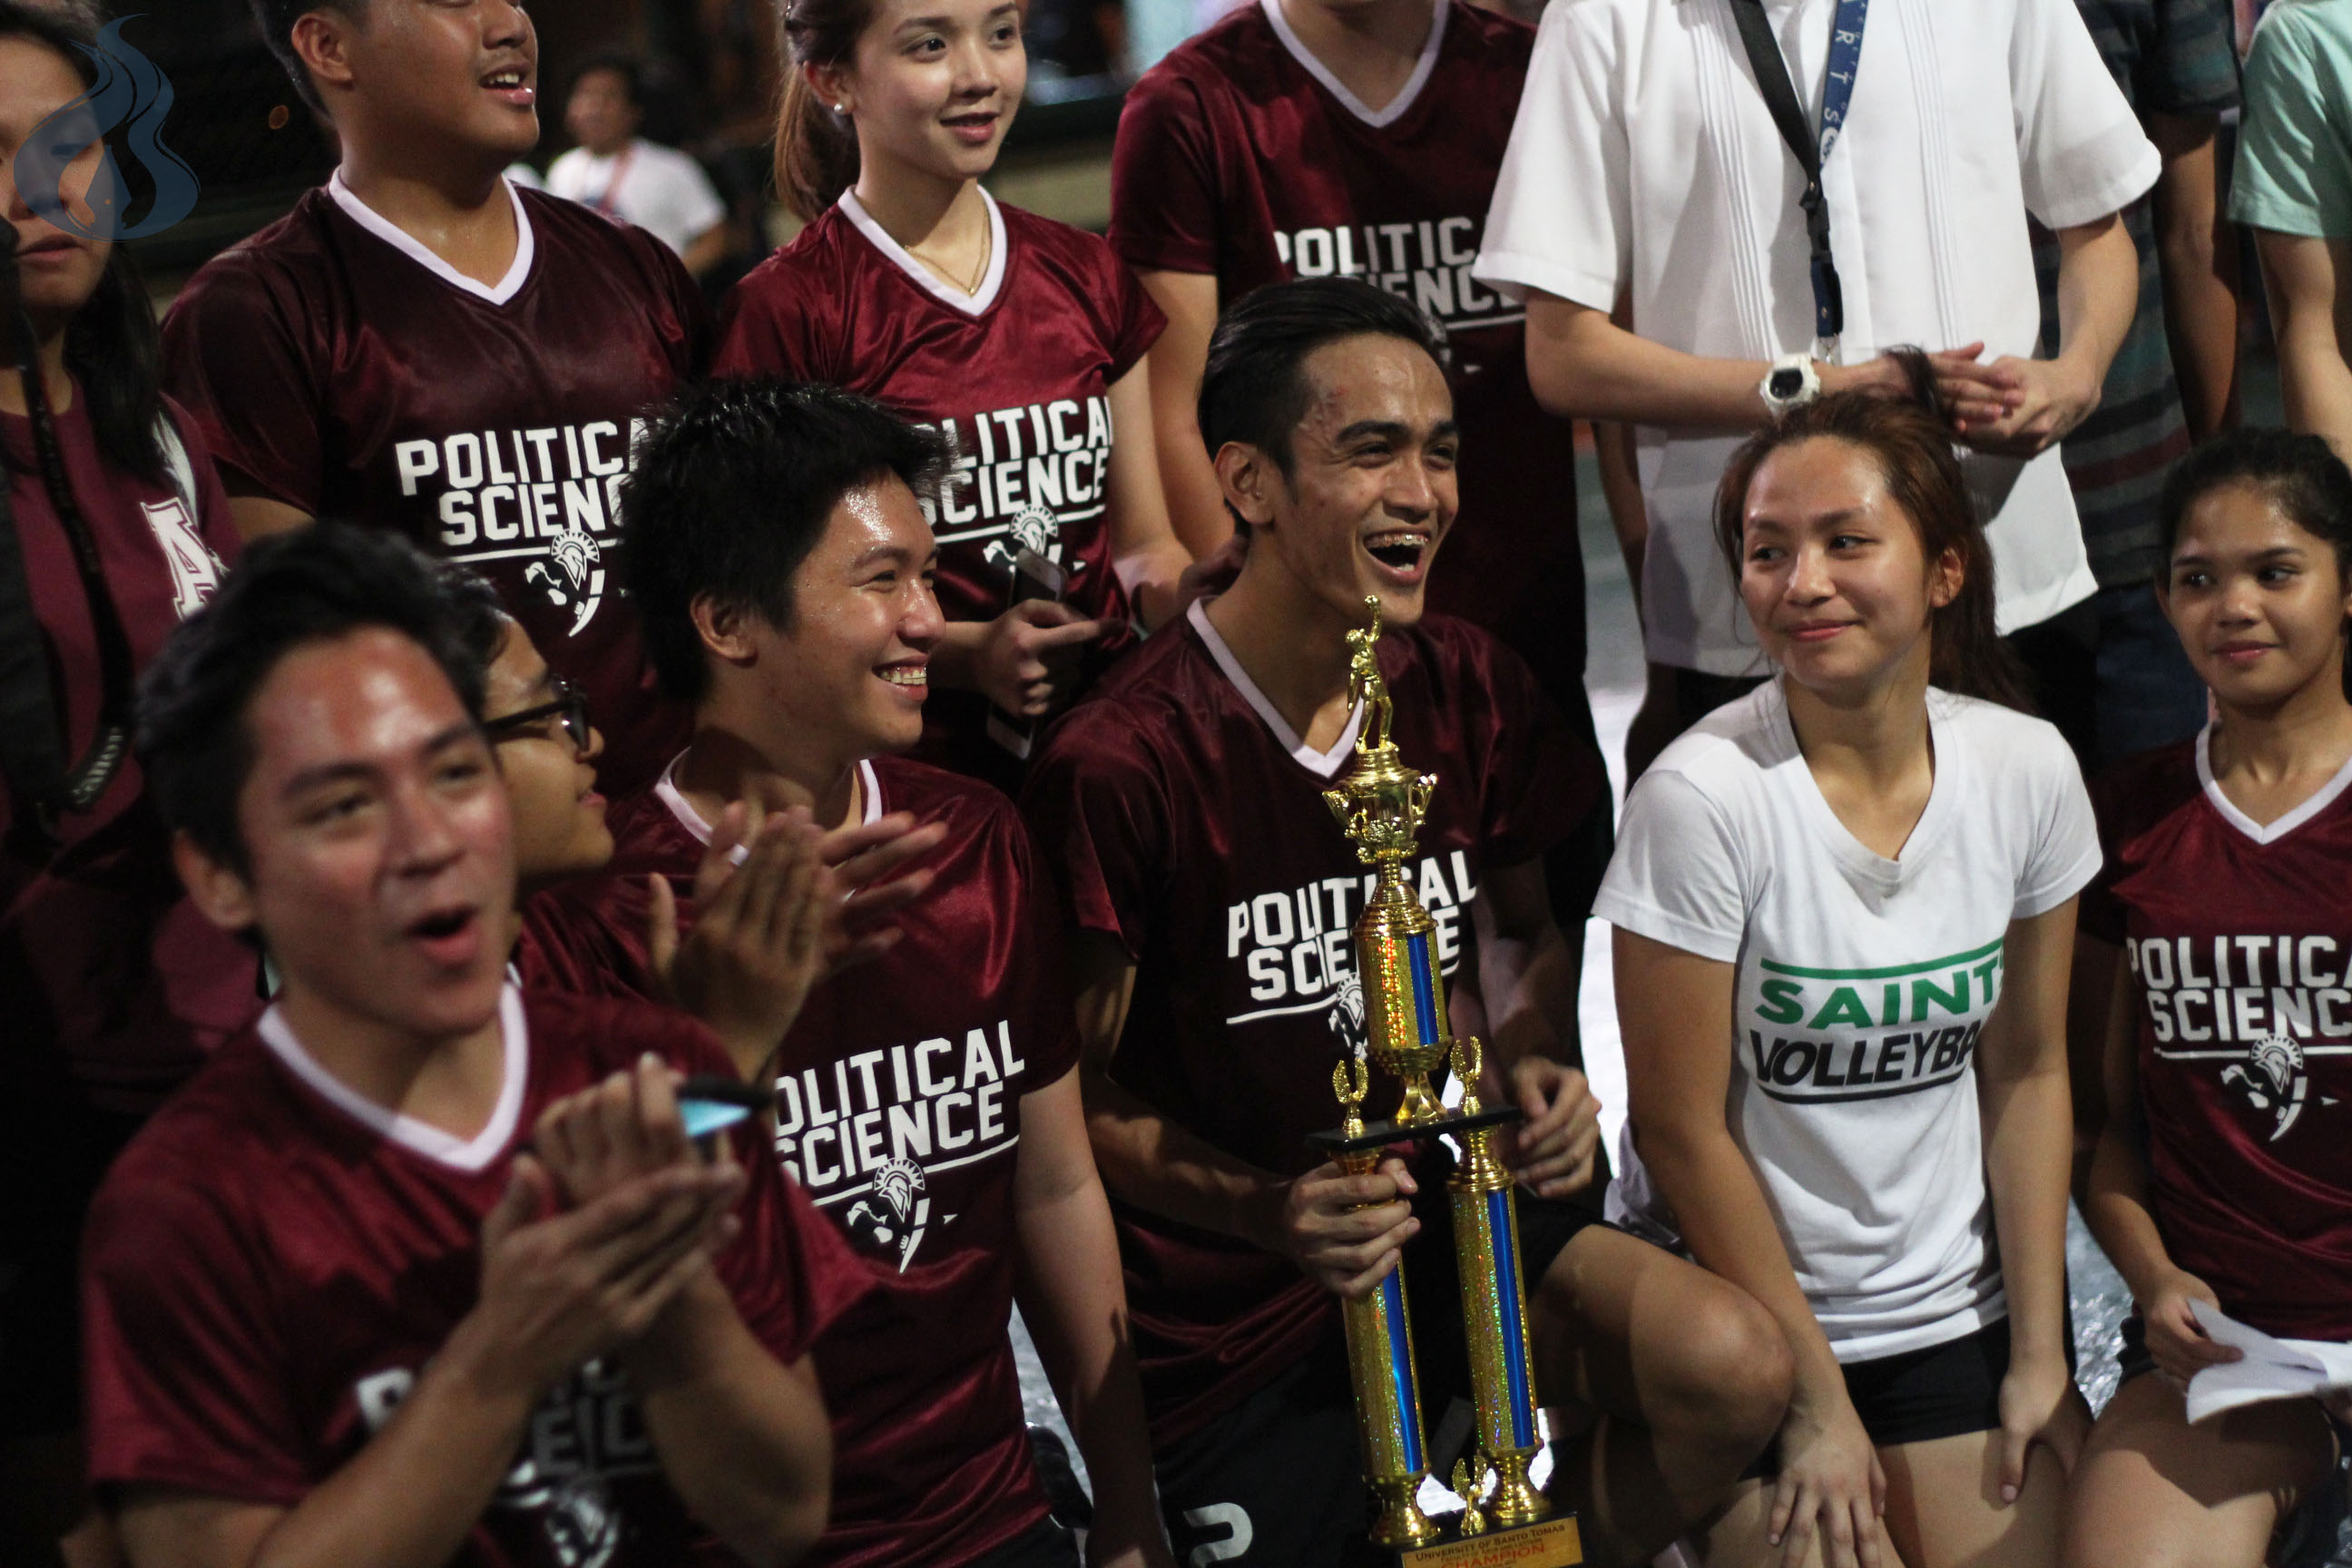 PolSci crowned AB Sportsfest volleyball champ